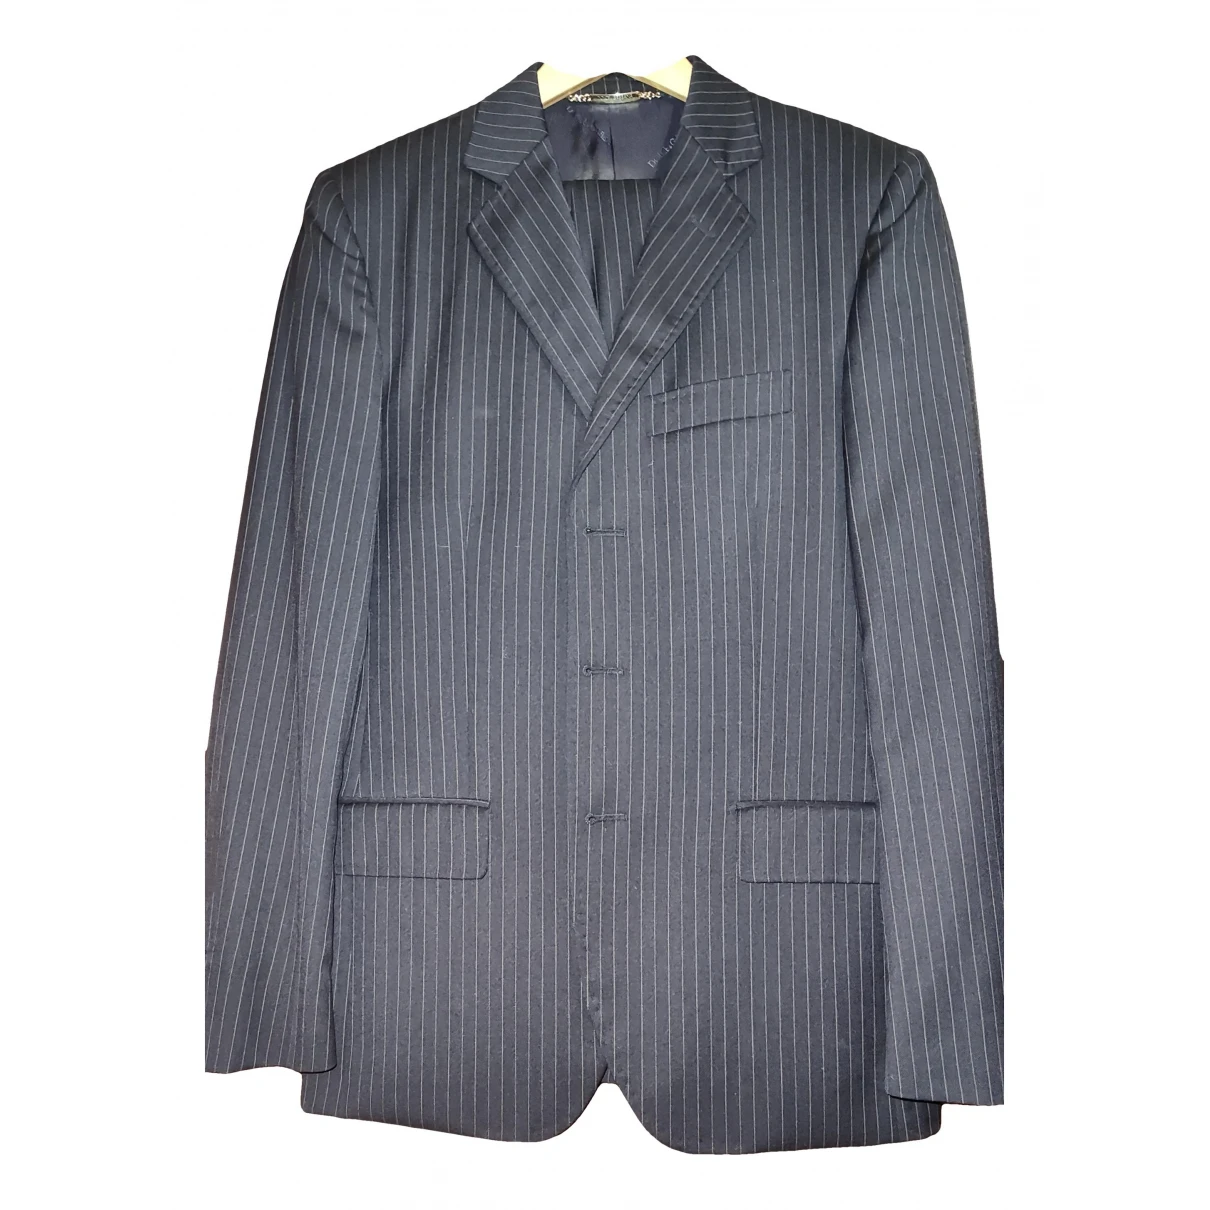 clothing Dolce & Gabbana suits for Male Wool 46 IT. Used condition